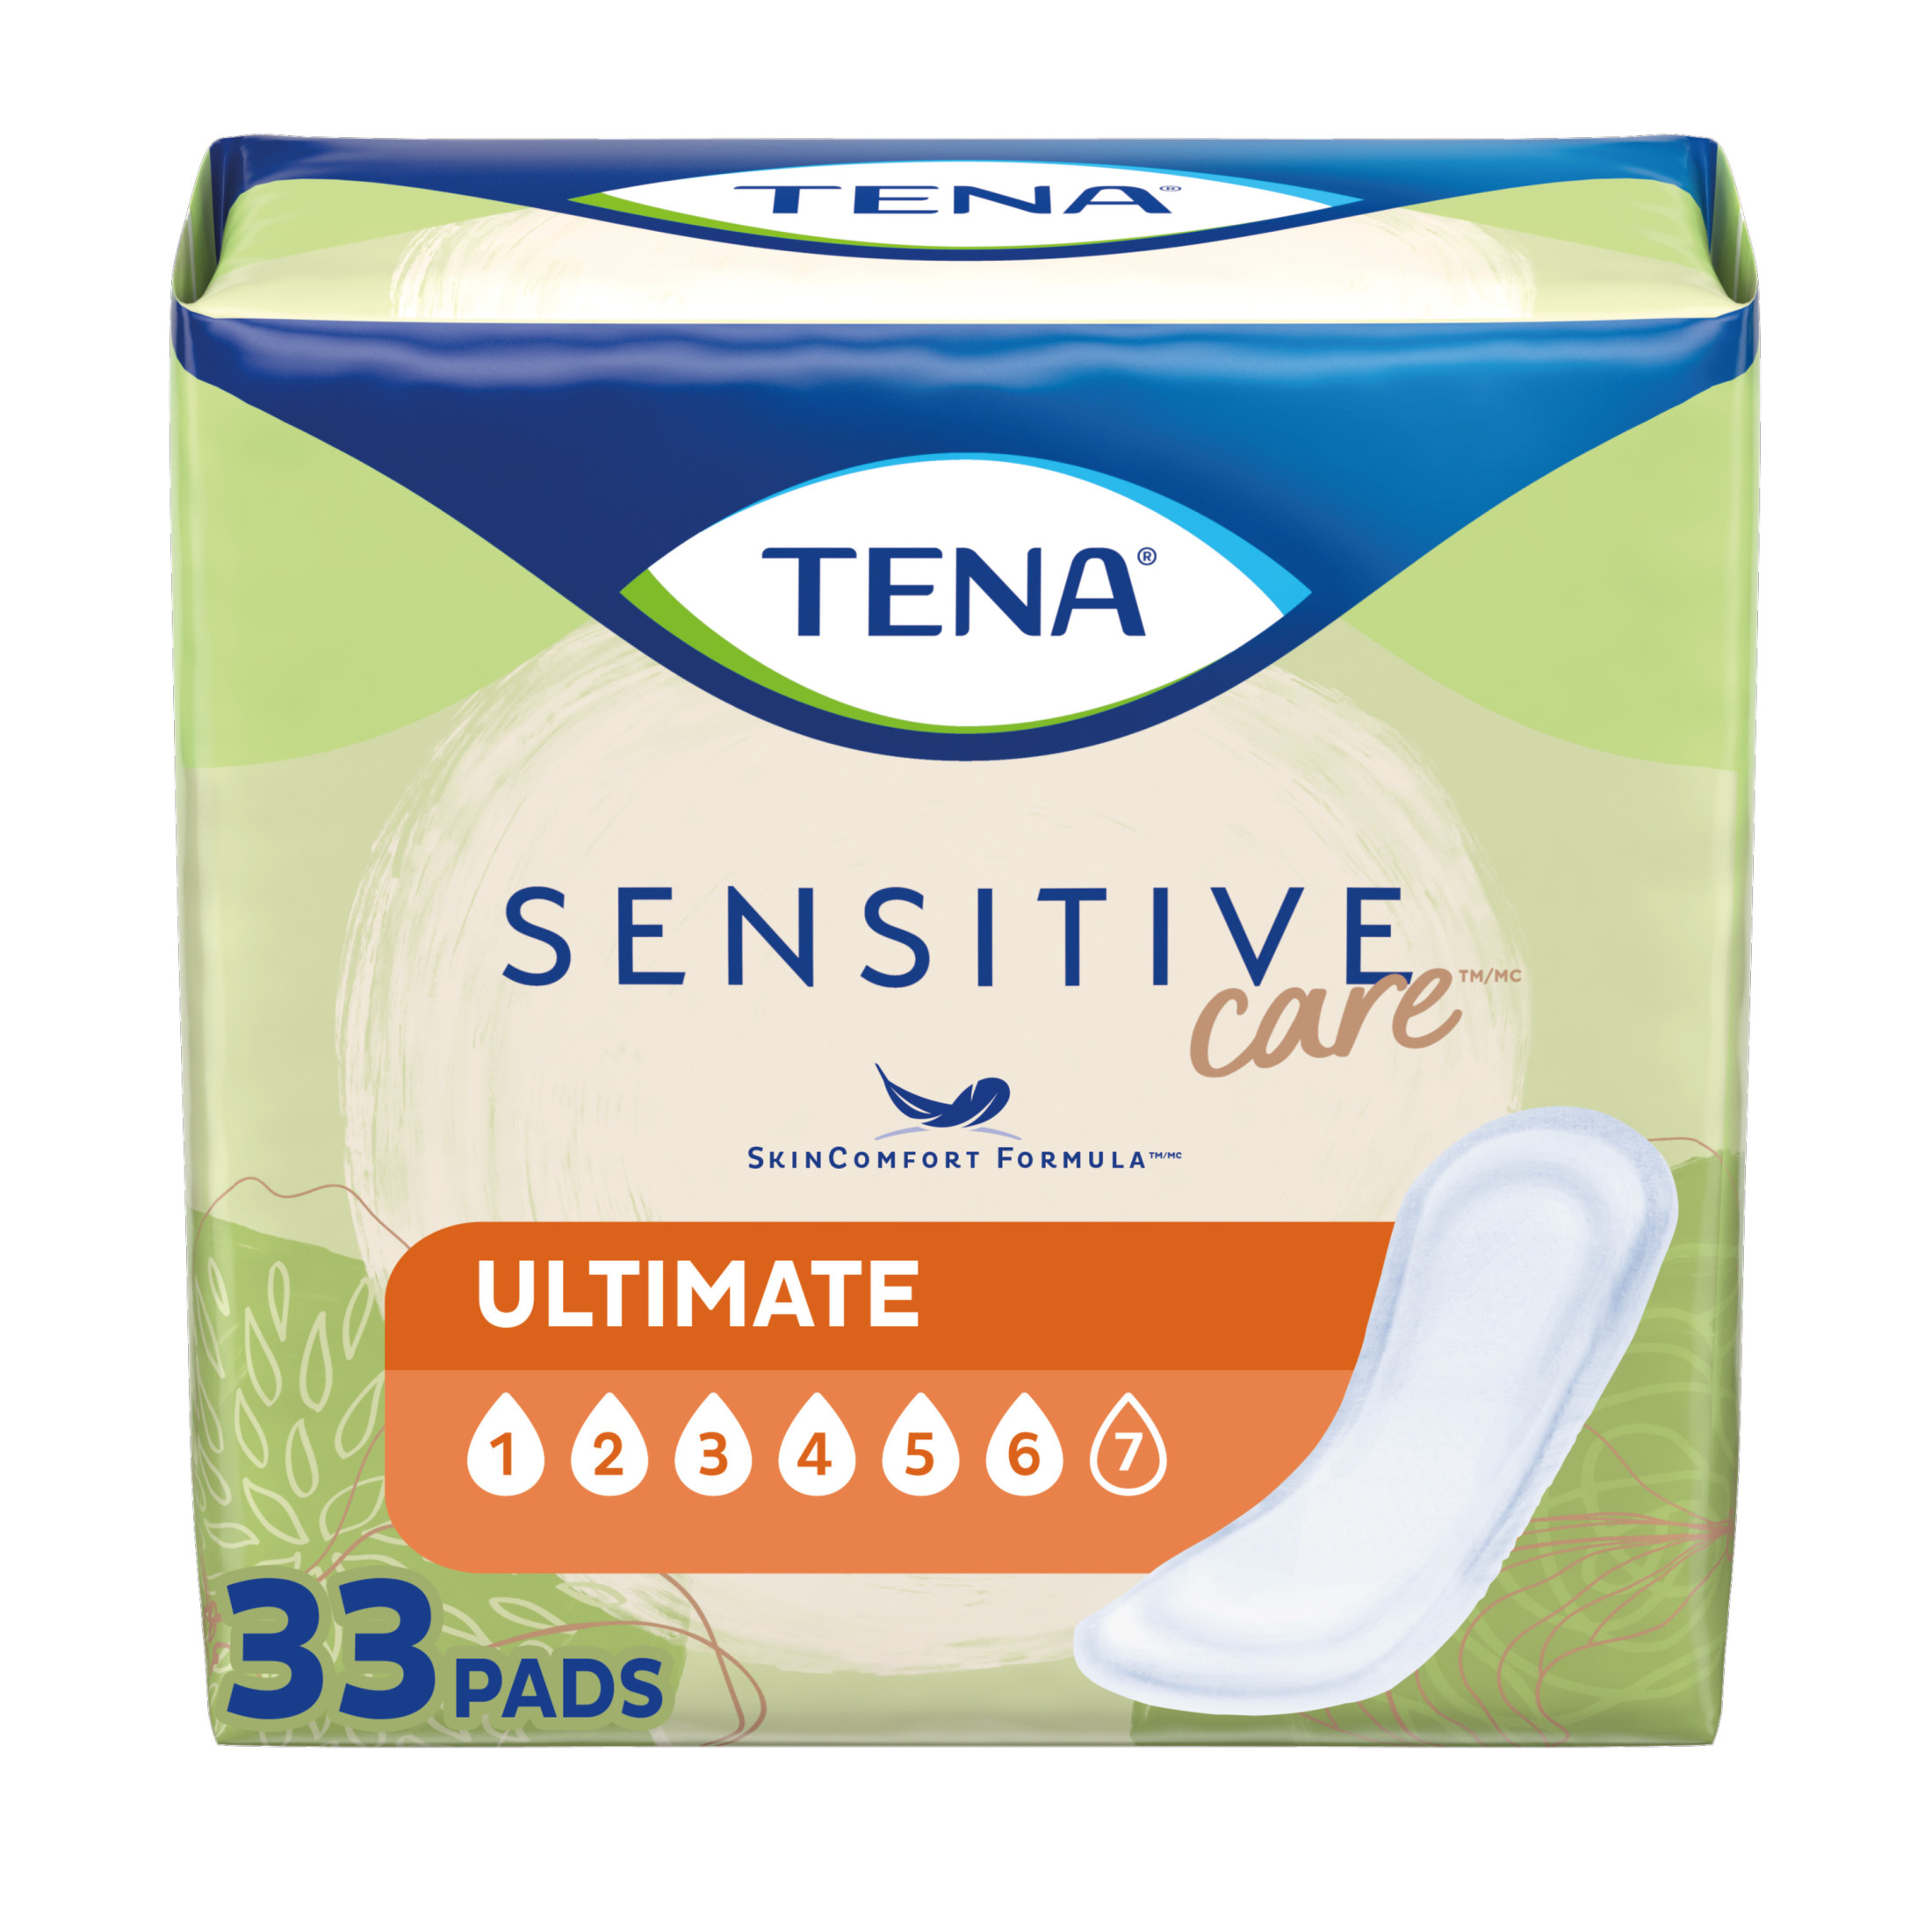 Tena Sensitive Care Ultimate Absorbency Incontinence Pad for Women, 33ct - image 1 of 6